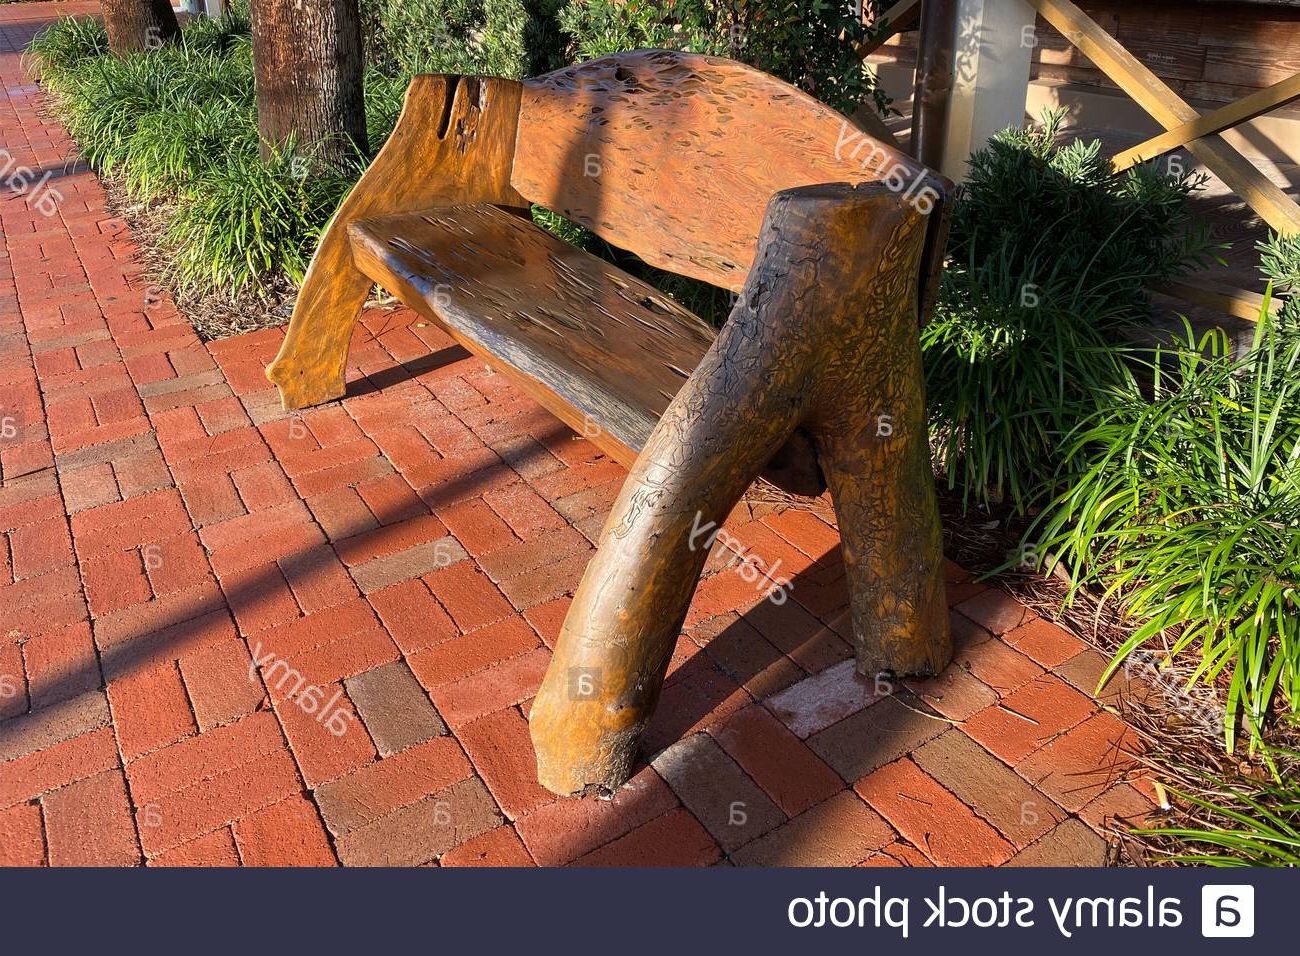 Strasburg Blossoming Decorative Iron Garden Benches Pertaining To 2019 Page 2 – Public Garden Bench High Resolution Stock (View 26 of 30)